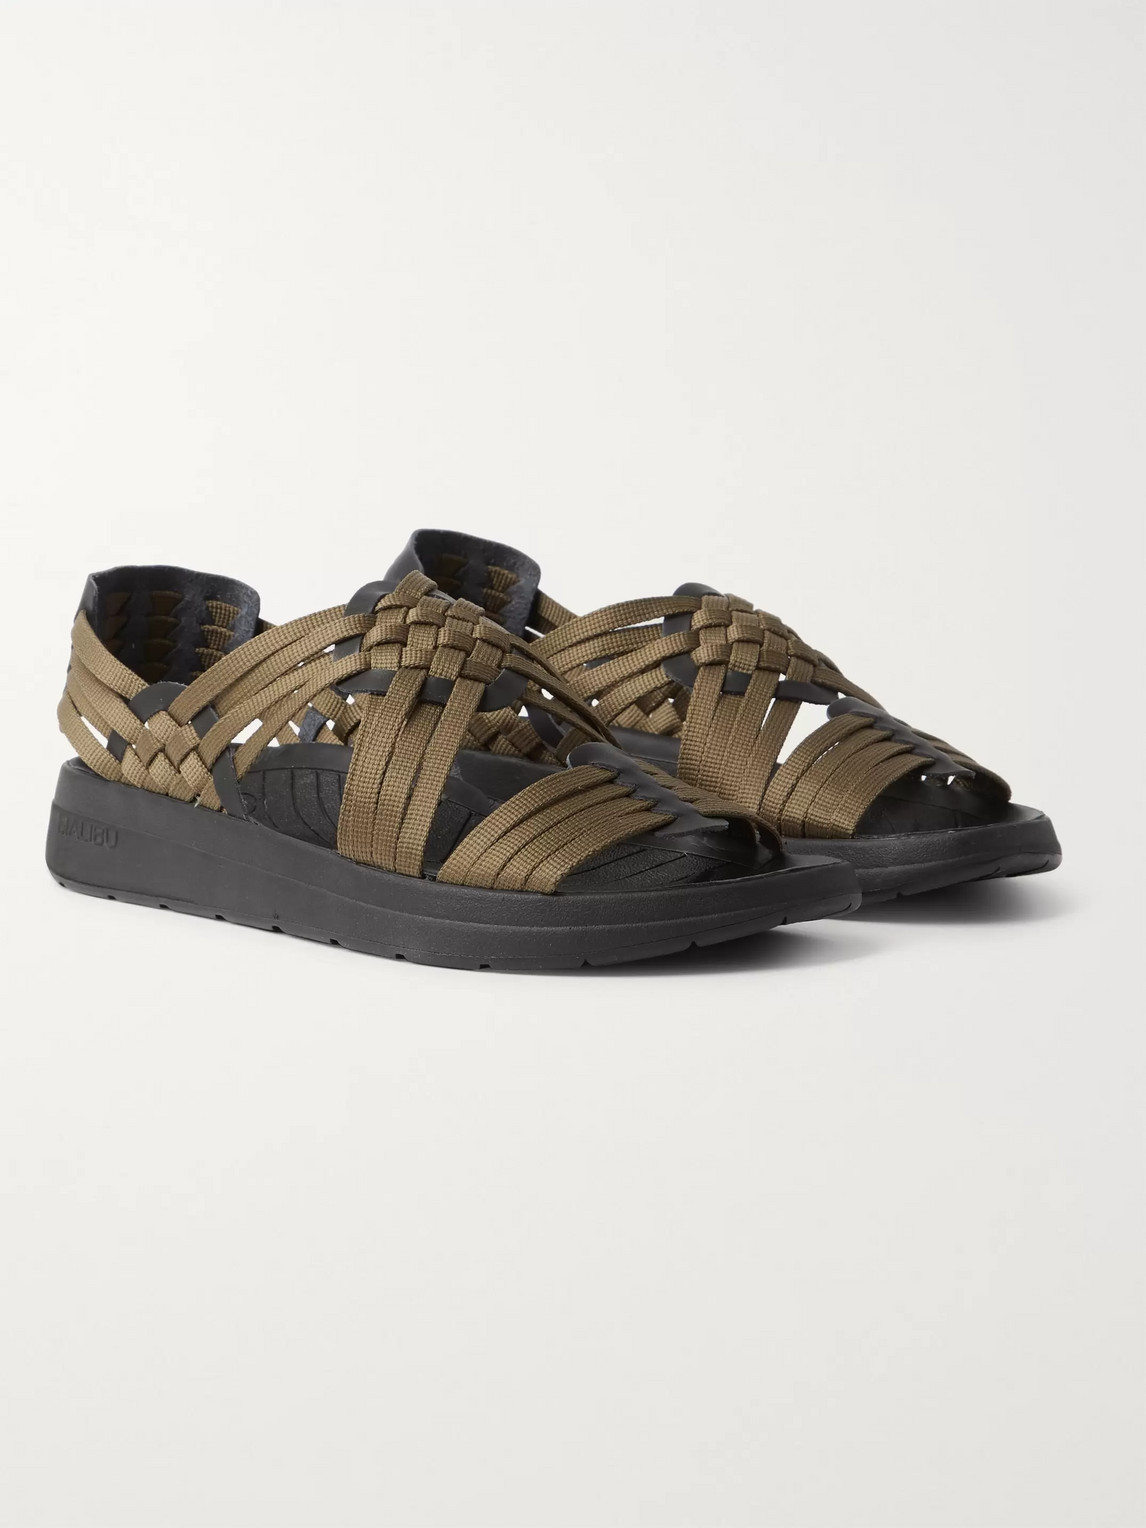 MALIBU CANYON FAUX LEATHER-TRIMMED WOVEN WEBBING SANDALS